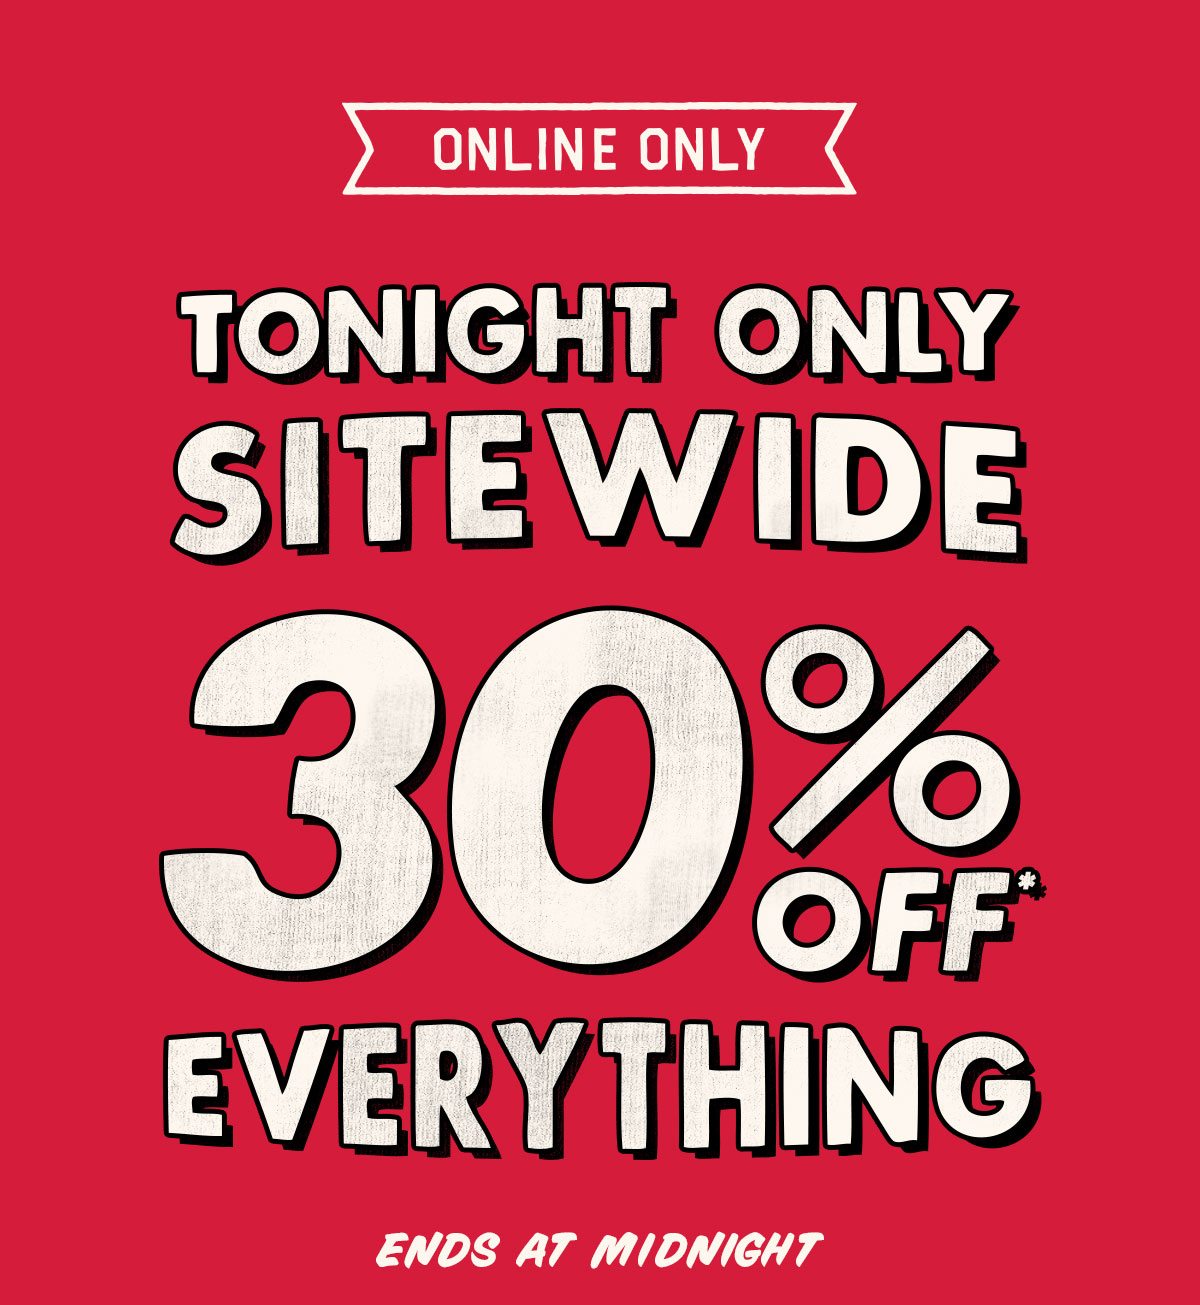 Tonight only! 30% off* everything sitewide, ends at midnight.